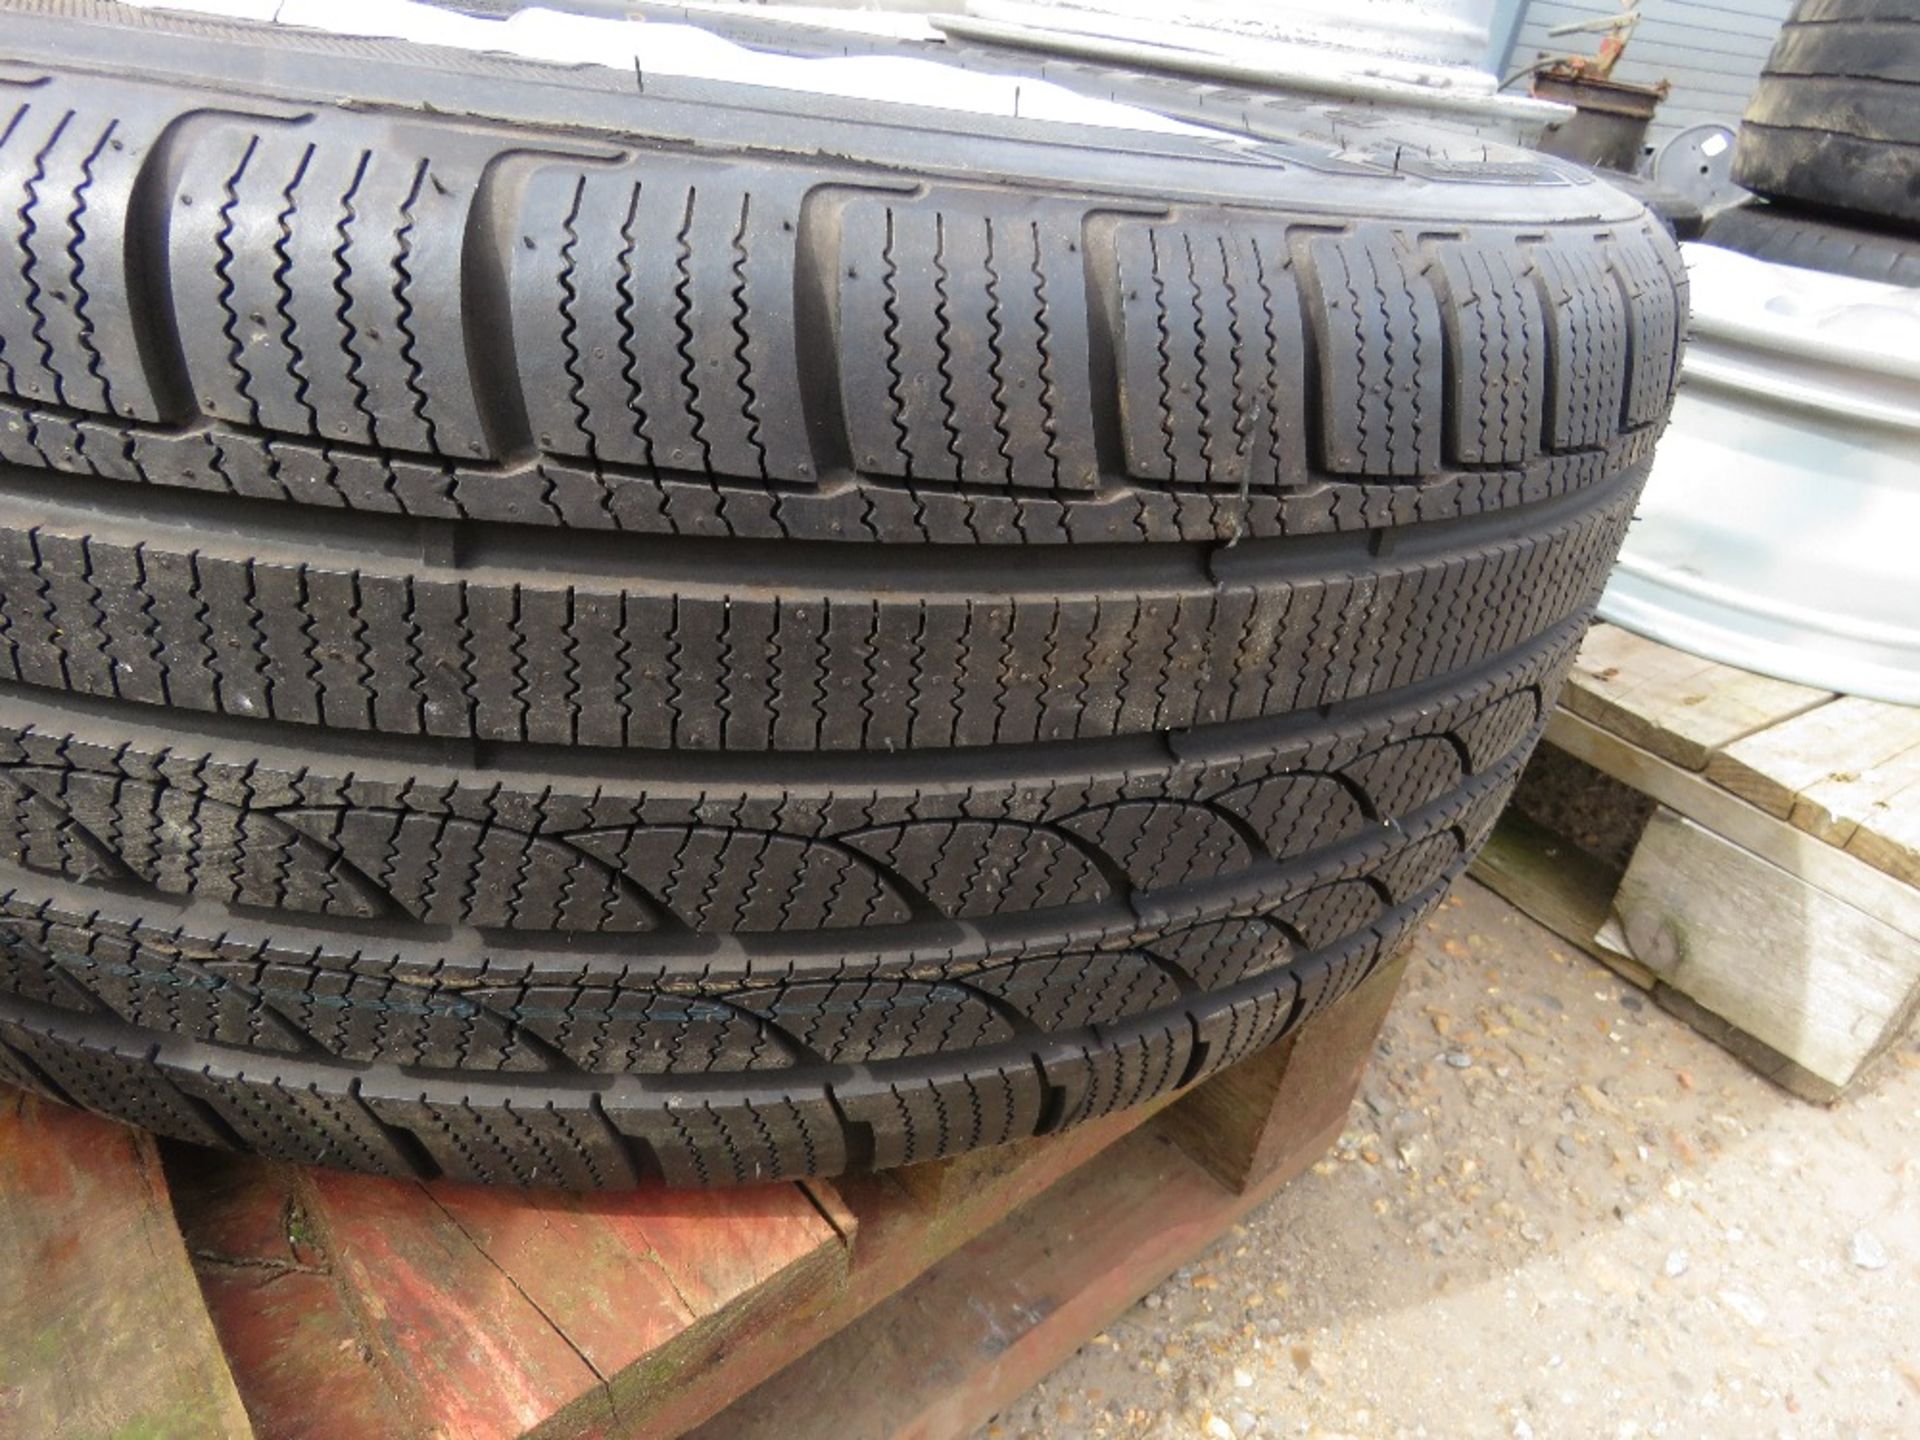 SET OF VW 235/55R17 SNOW TYRES ON ALLOY RIMS. - Image 3 of 5